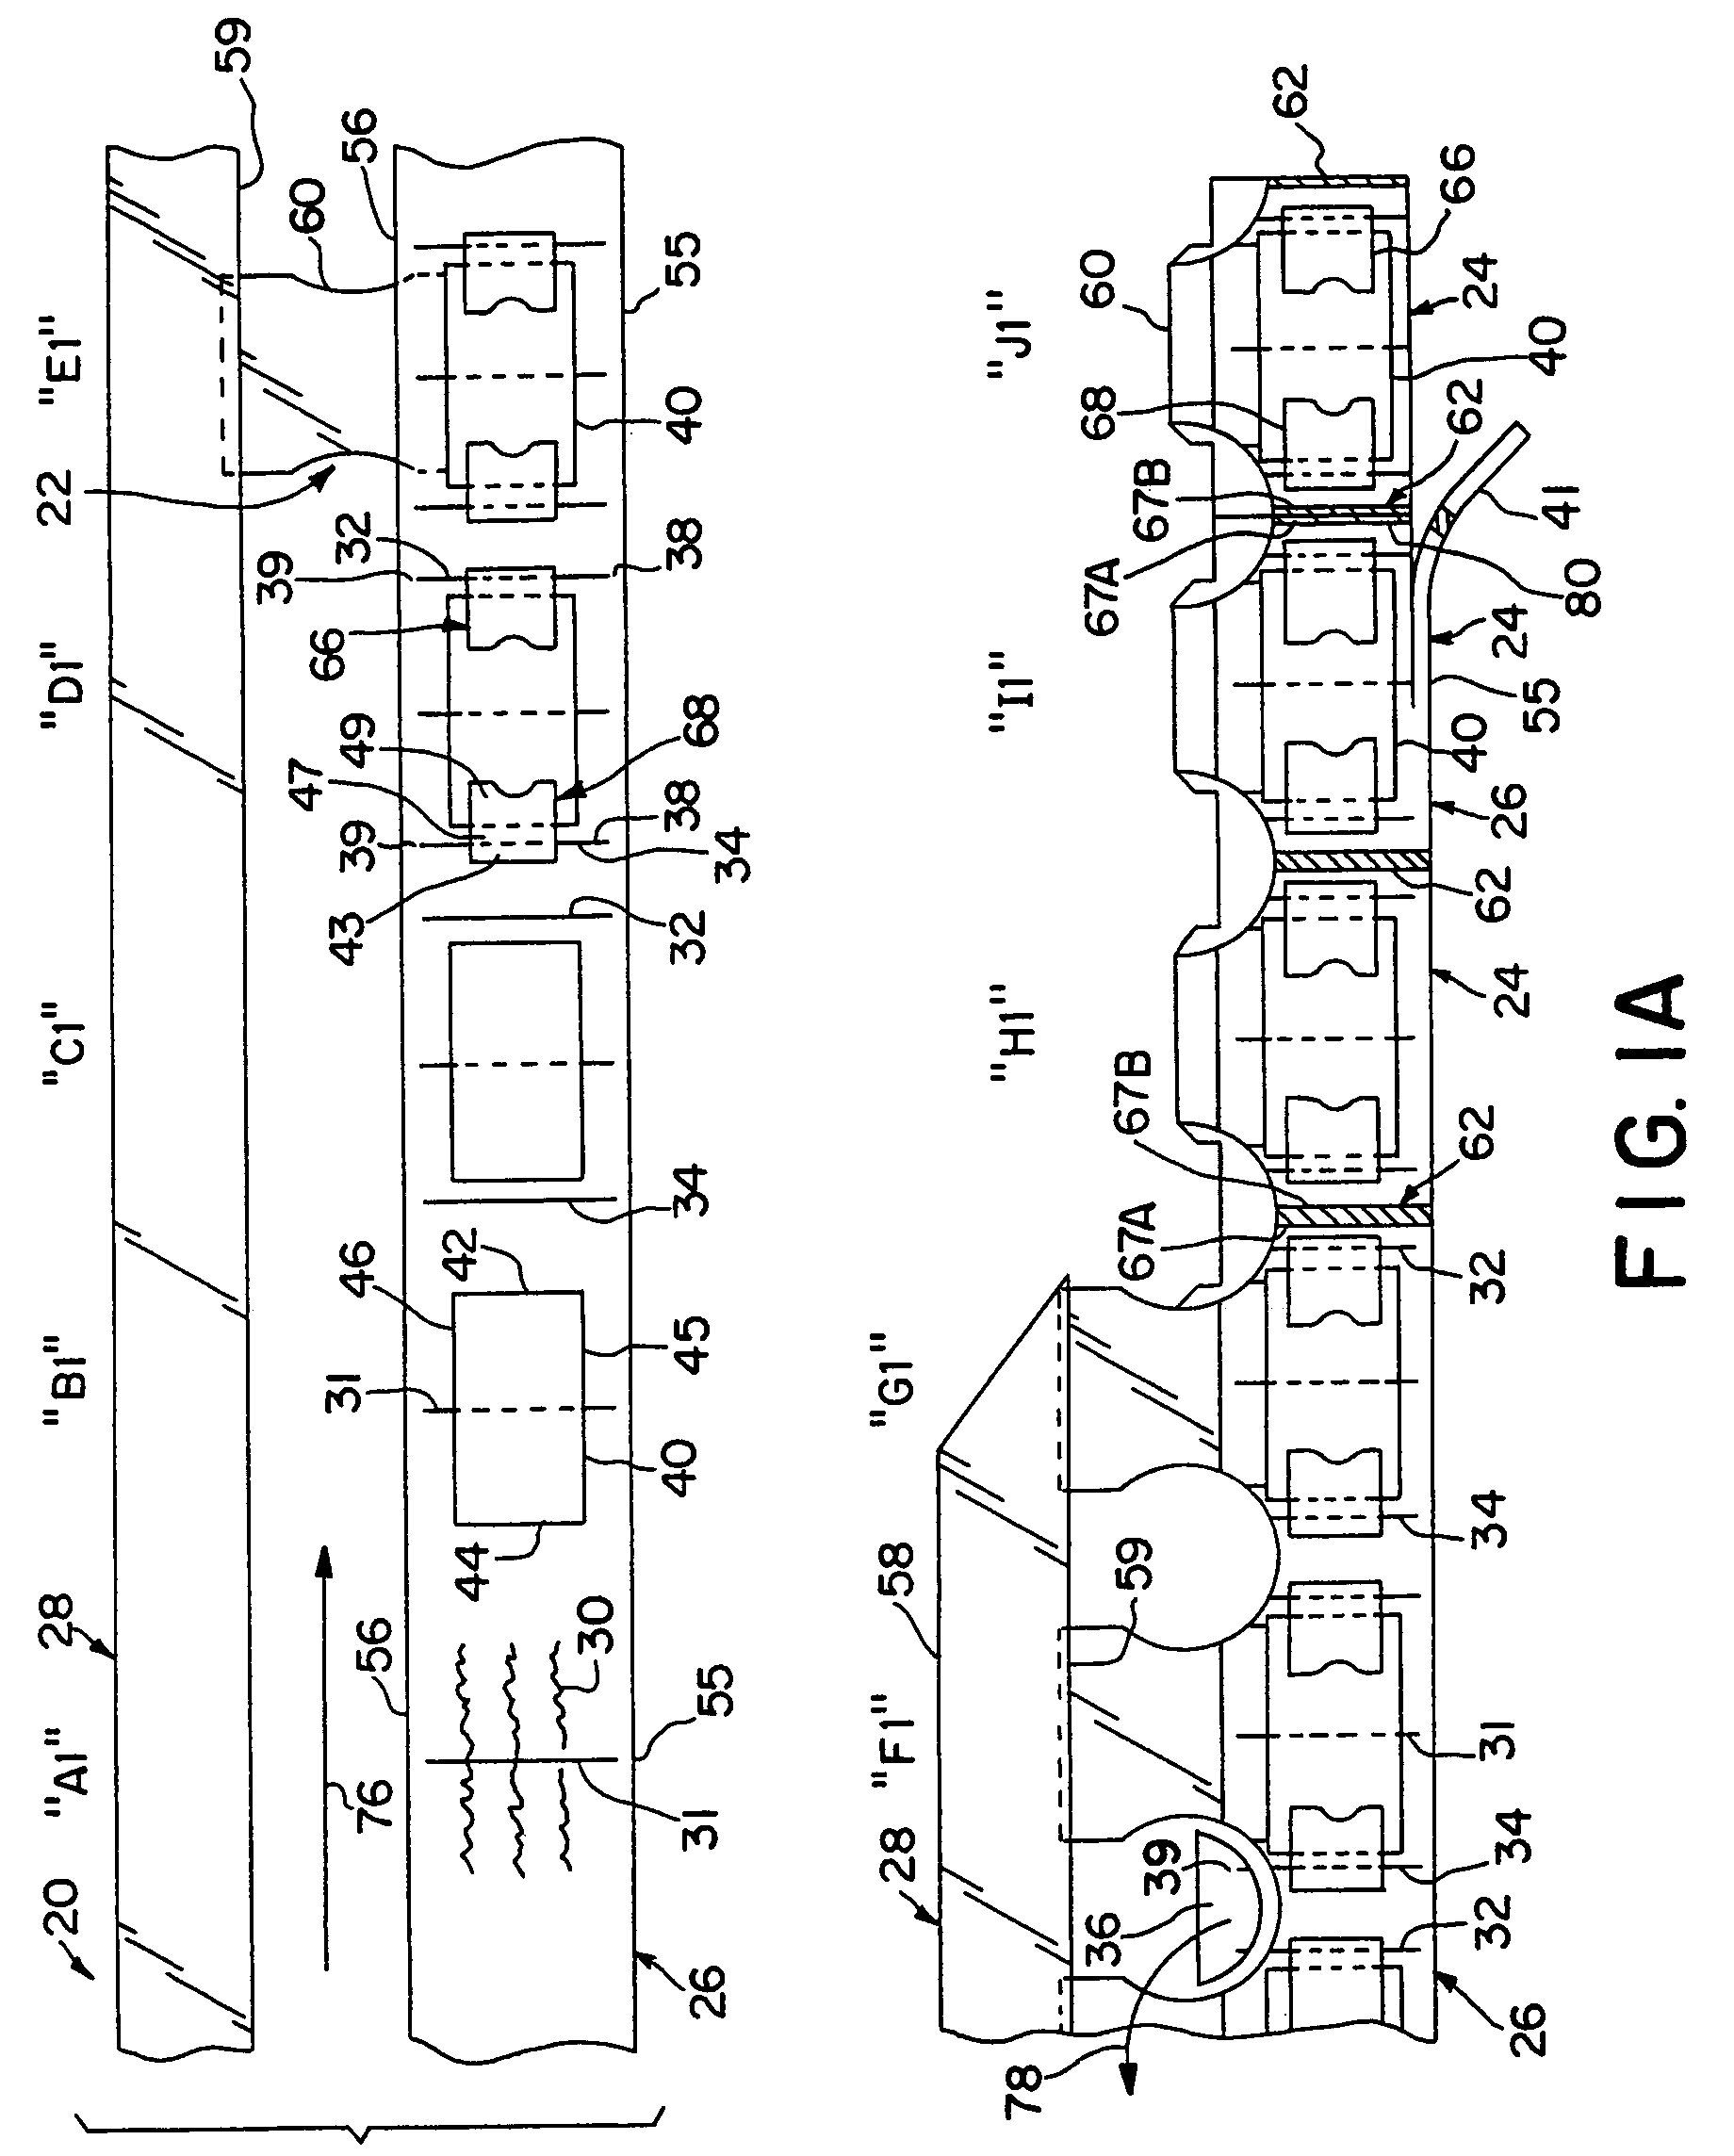 Method of assembling personal care absorbent article